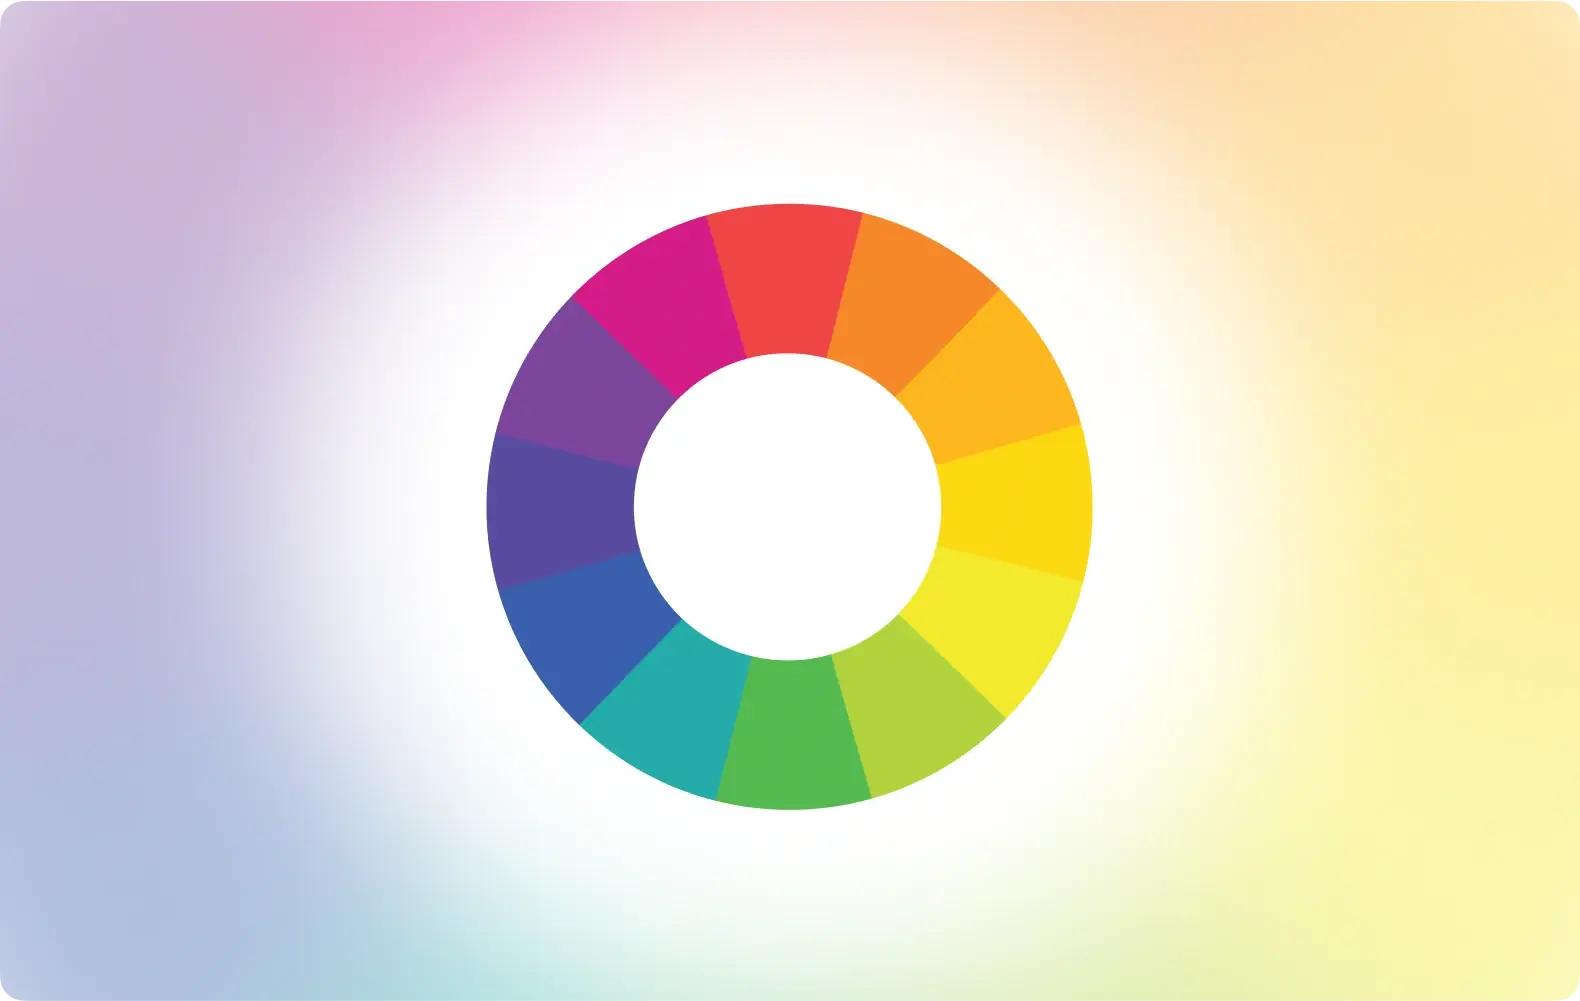 the fundamentals of understanding colour theory - textiles alive